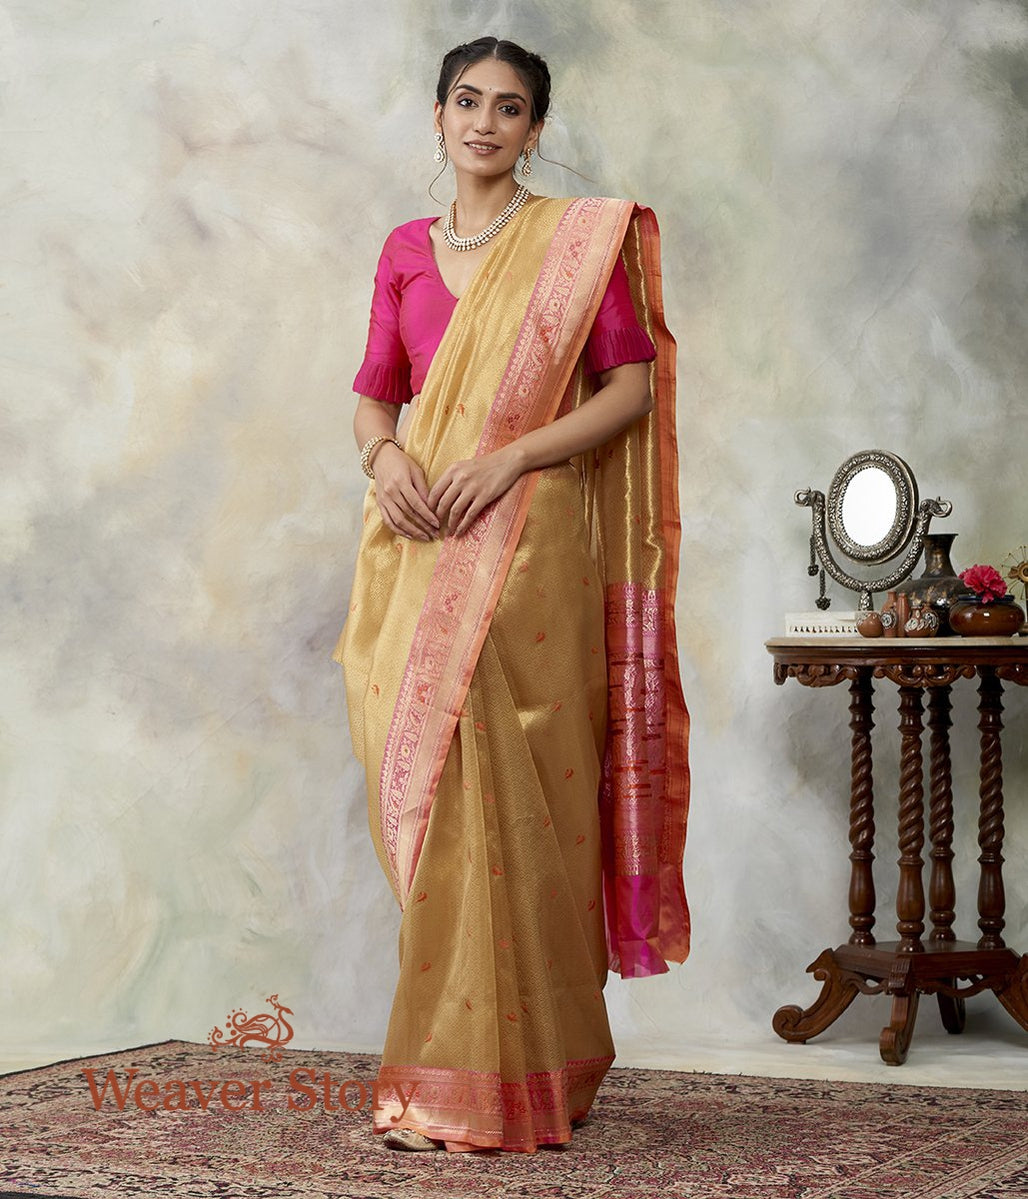 Handwoven_Gold_Kora_Tanchoi_Saree_with_Contrast_Border_WeaverStory_02